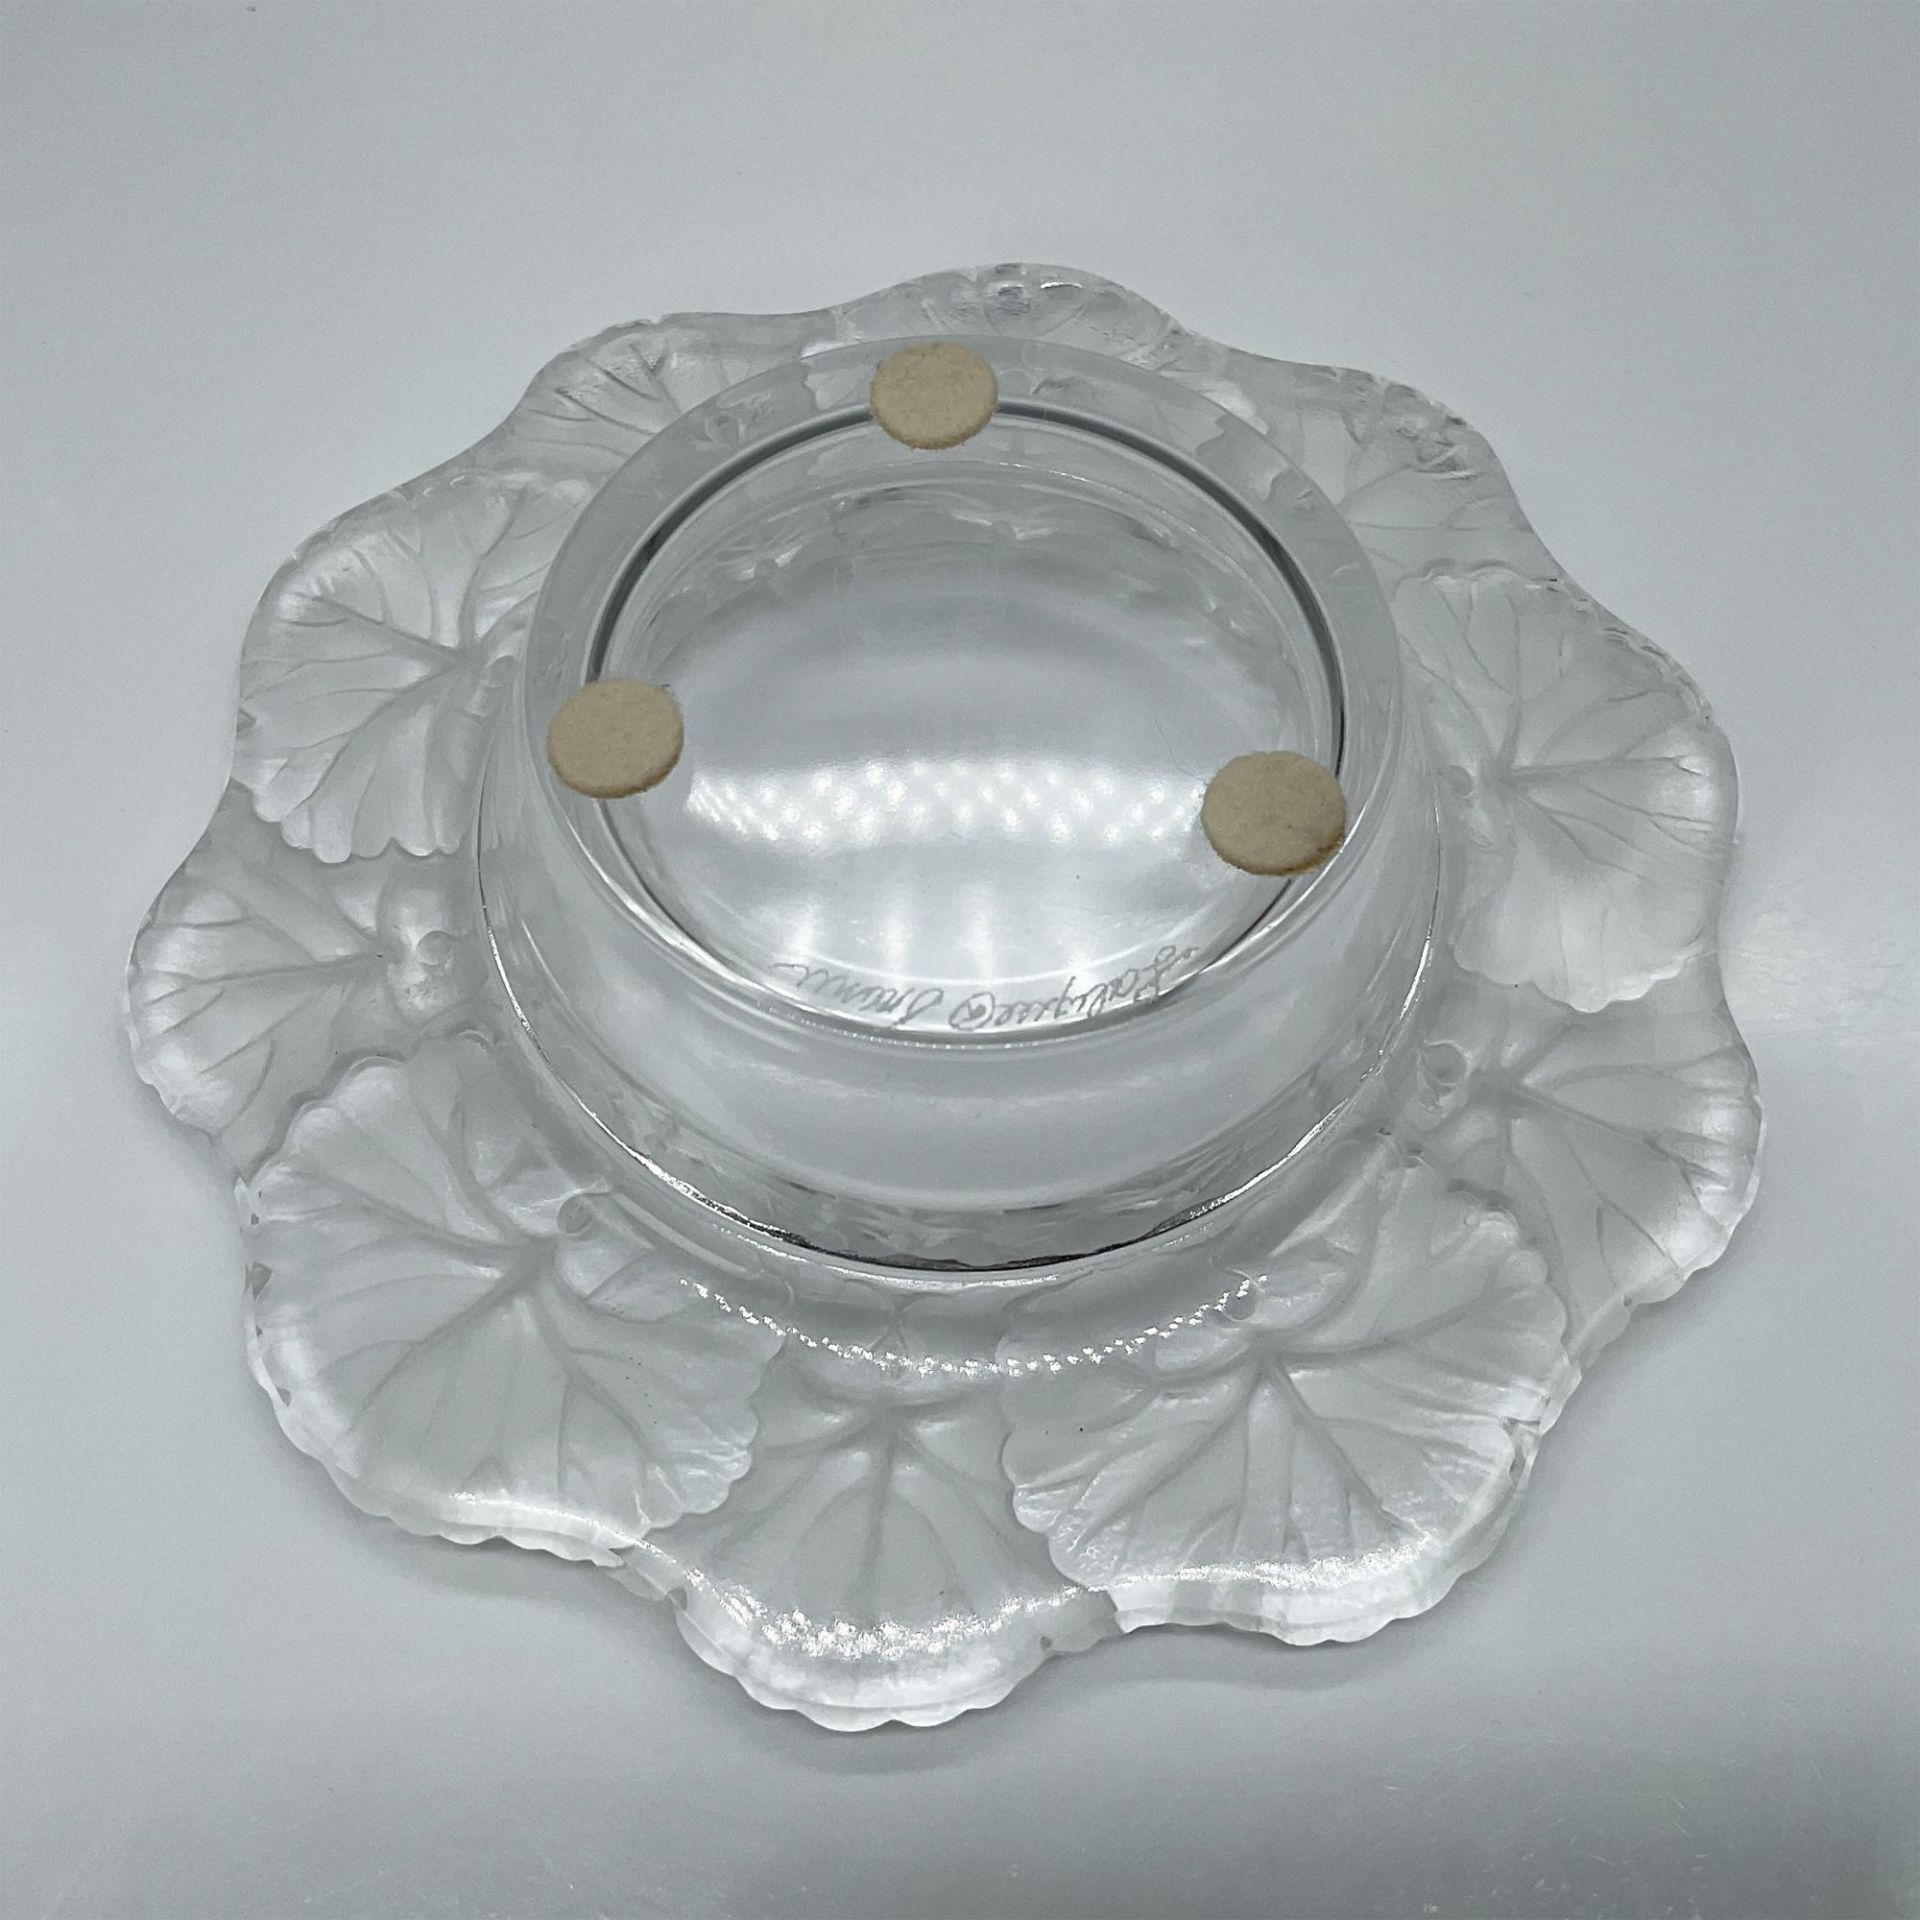 Lalique Crystal Candle Dish, Geraniums or Honfleur - Image 3 of 3